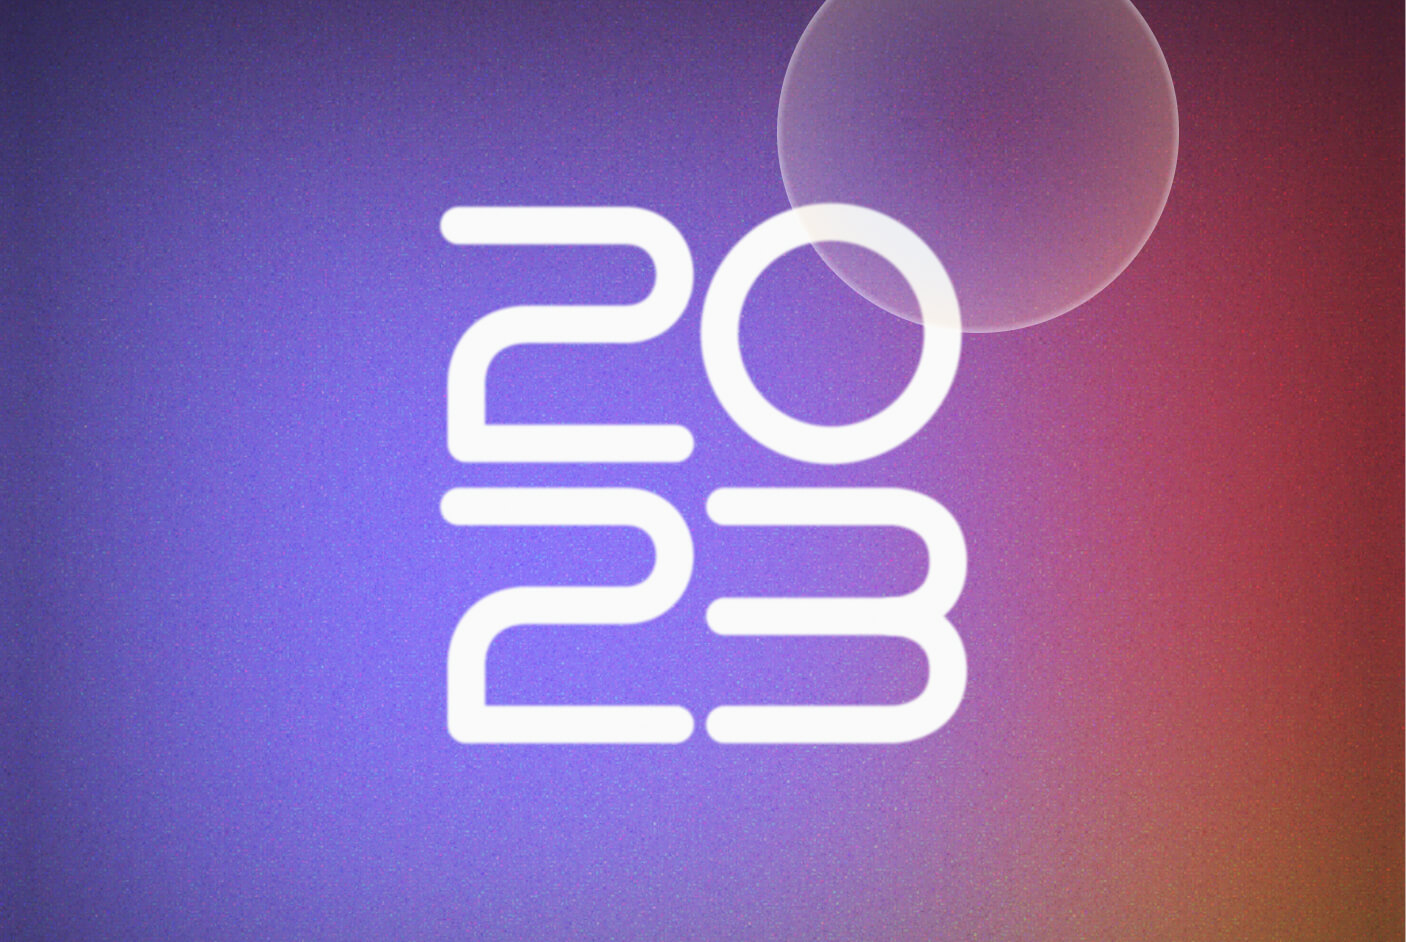 2023 over pink and purple backgrounds